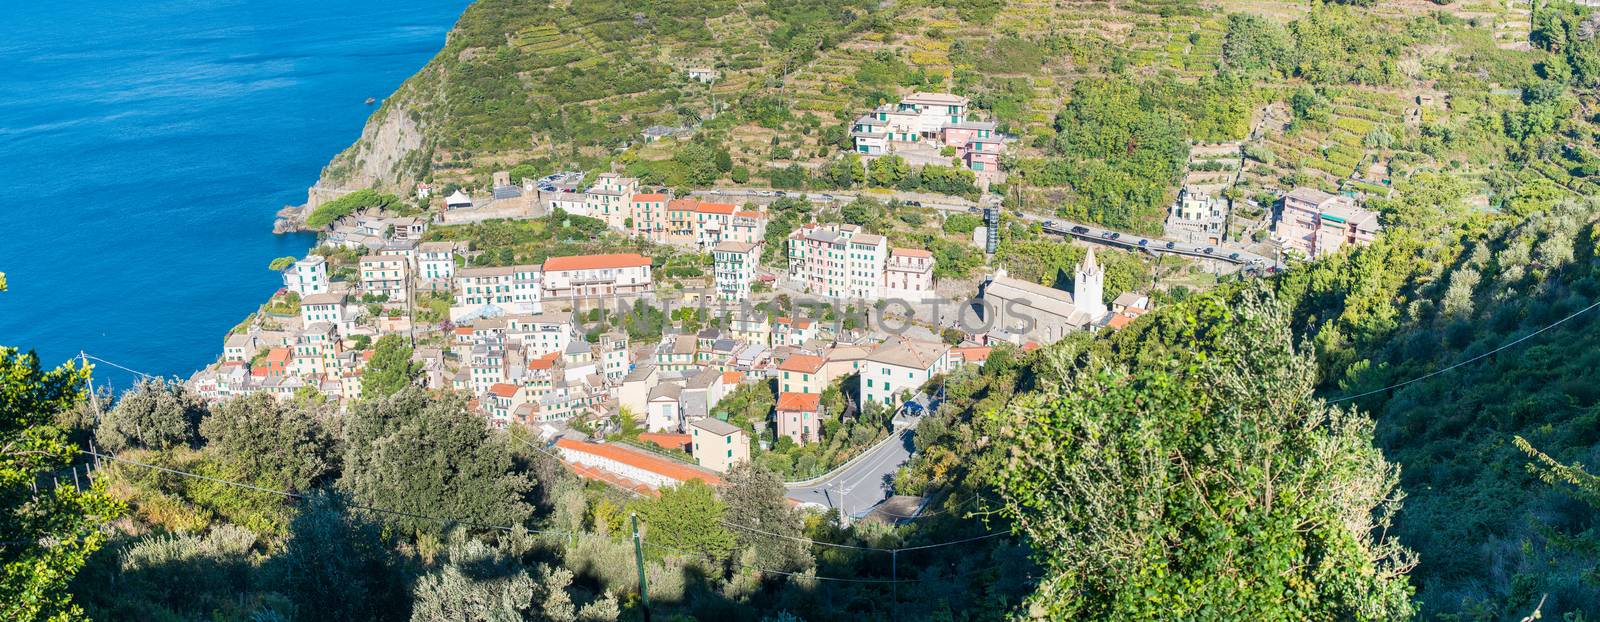 Aerial view of Riomaggiore on a sunny day. Five Lands, Italy by jovannig